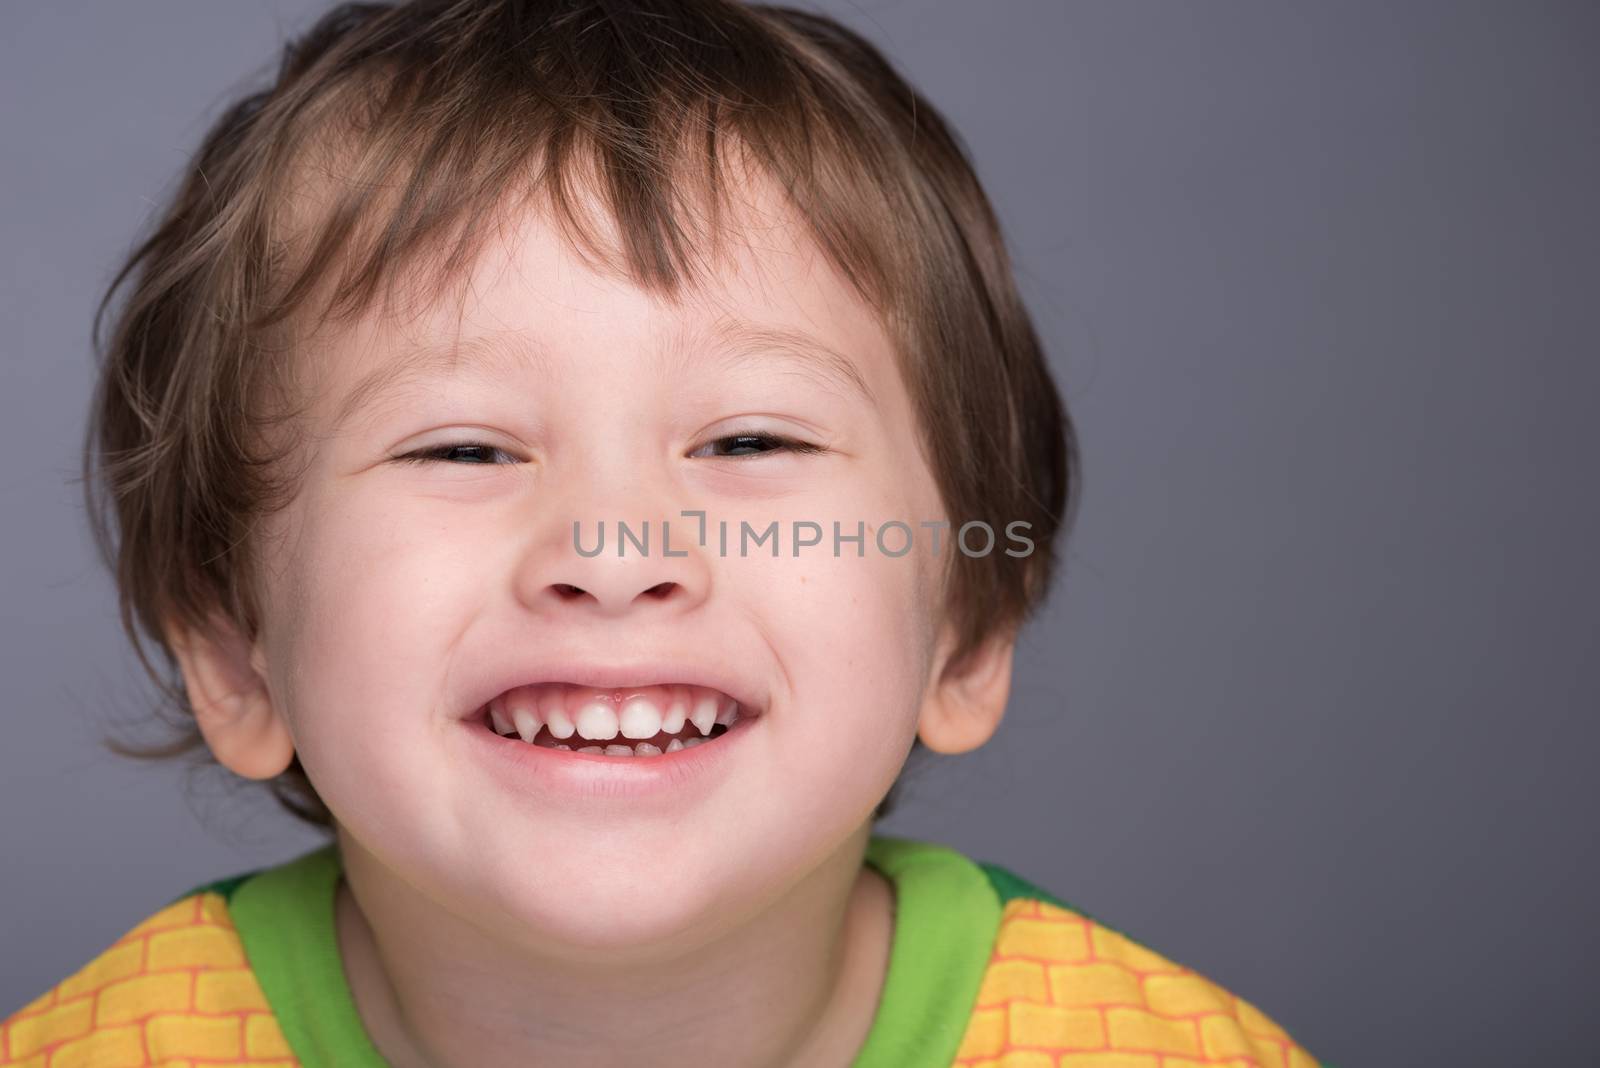 A happy 3 year old Japanese/Caucasian boy smiling.